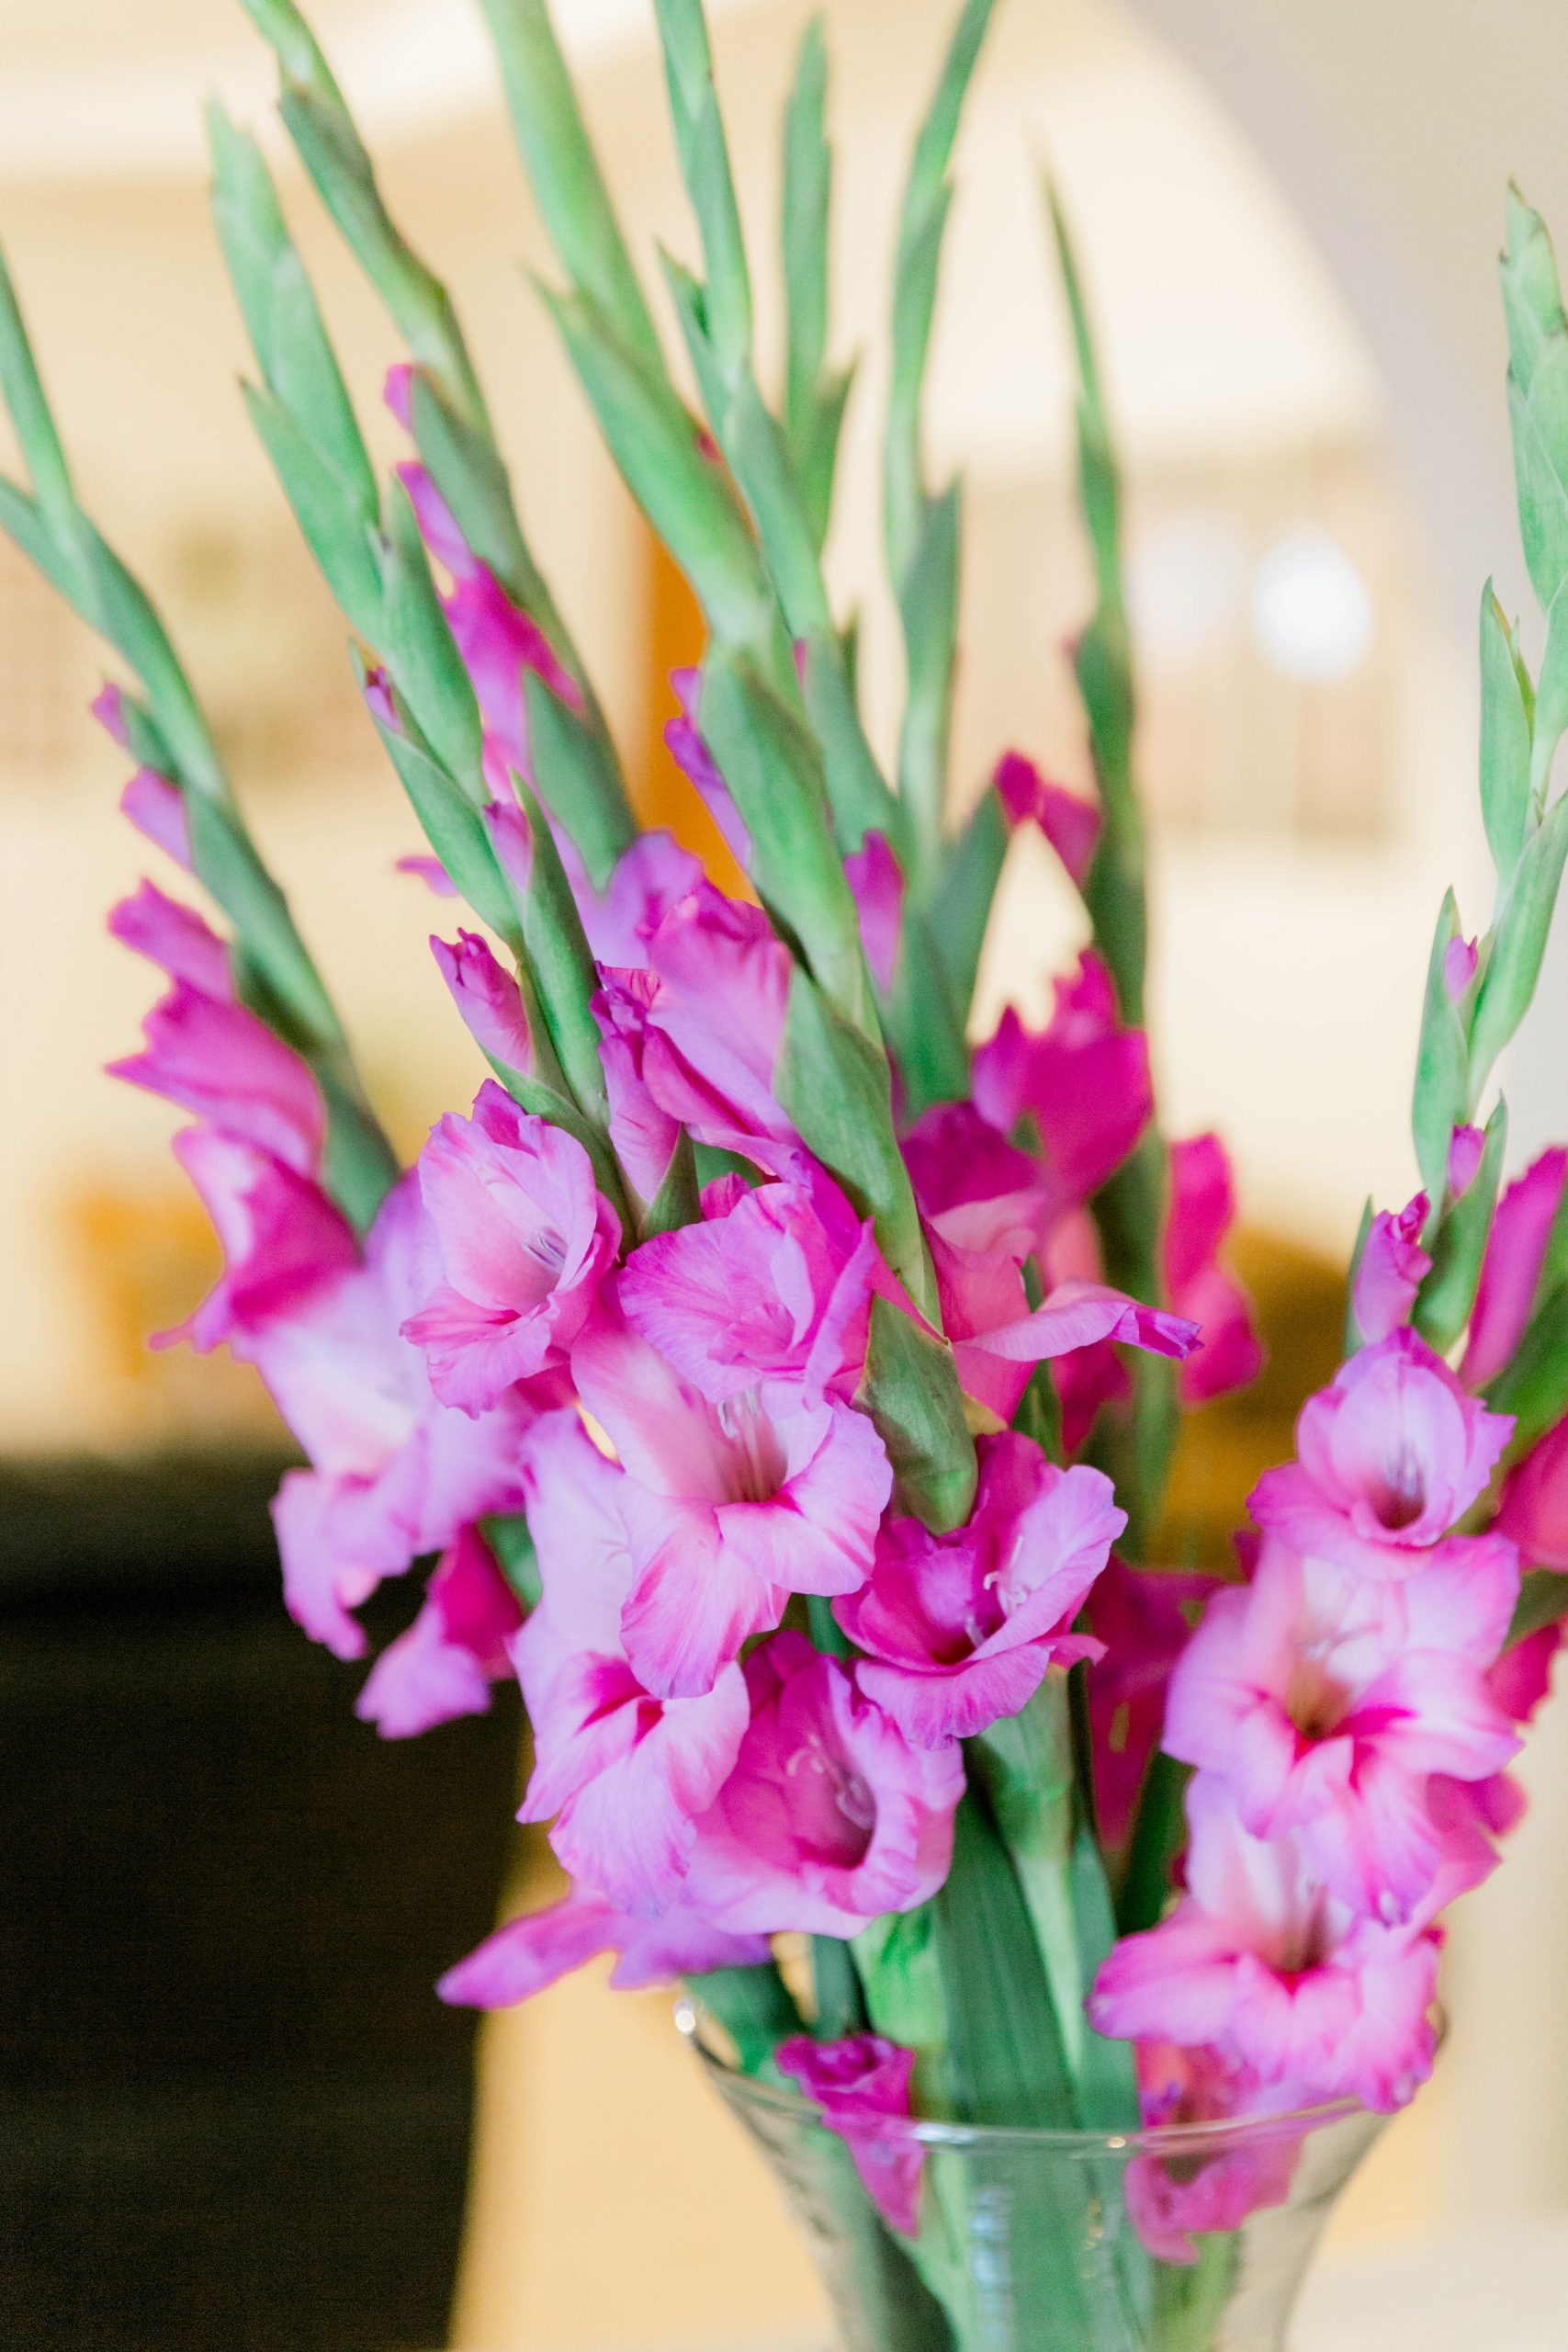 What’s The Difference Between Gladiolus And Hollyhocks?